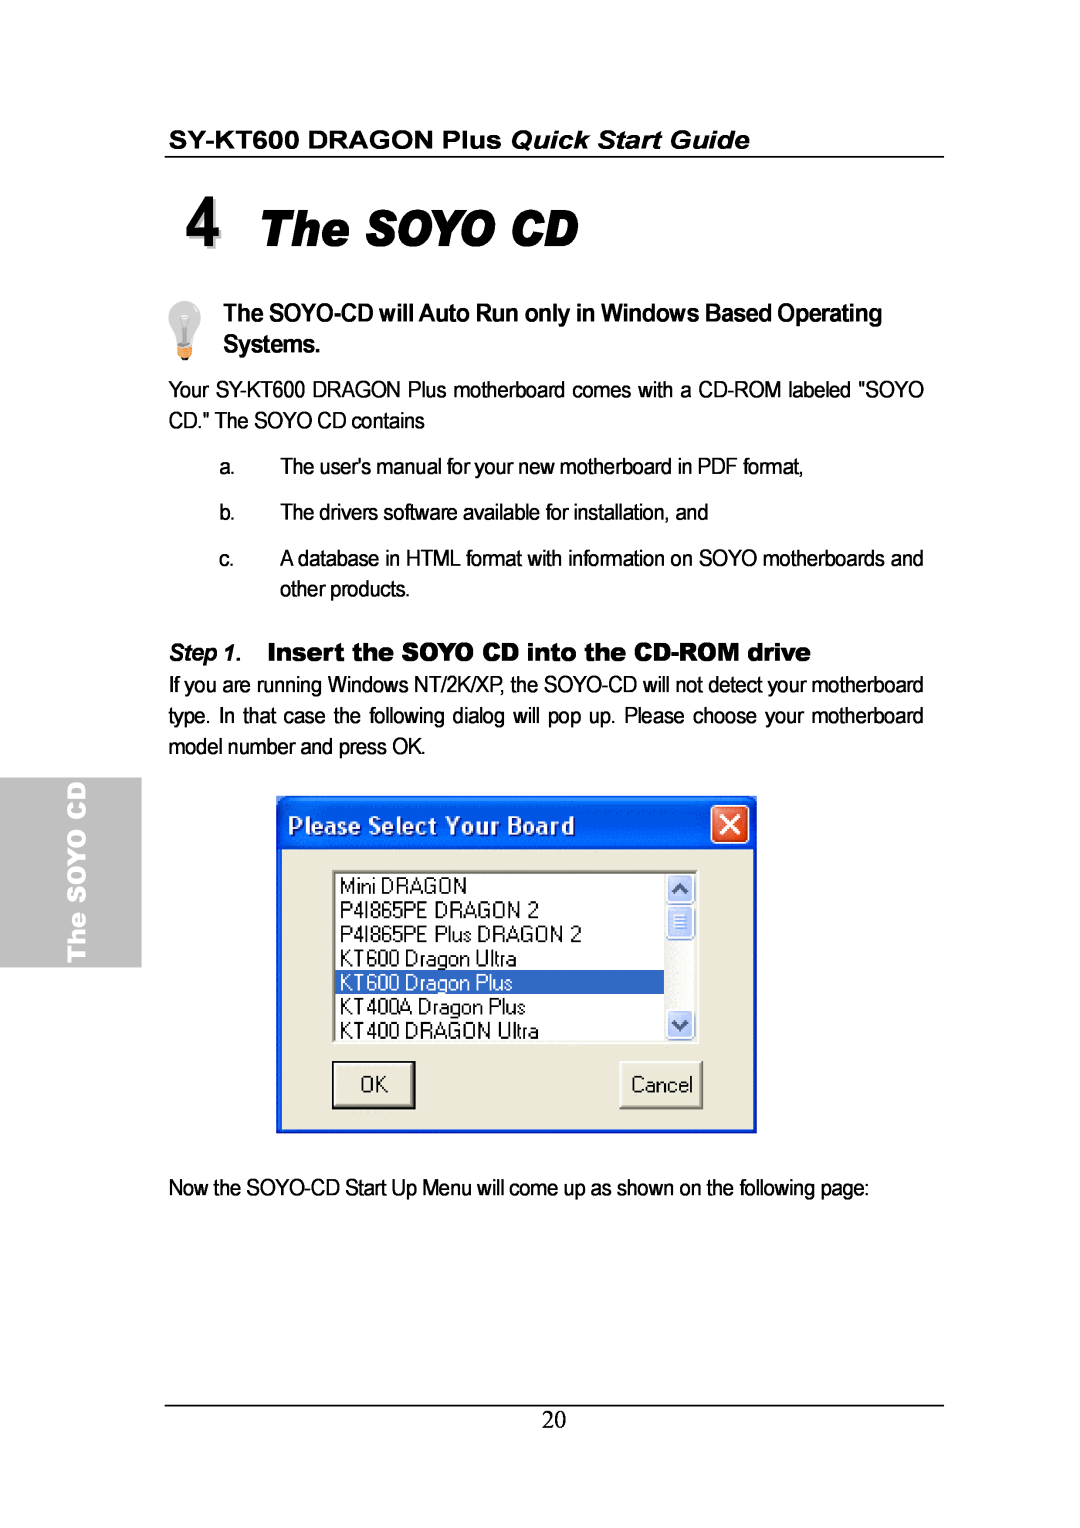 SOYO SY-KT600 quick start The SOYO CD, The SOYO-CD will Auto Run only in Windows Based Operating Systems 